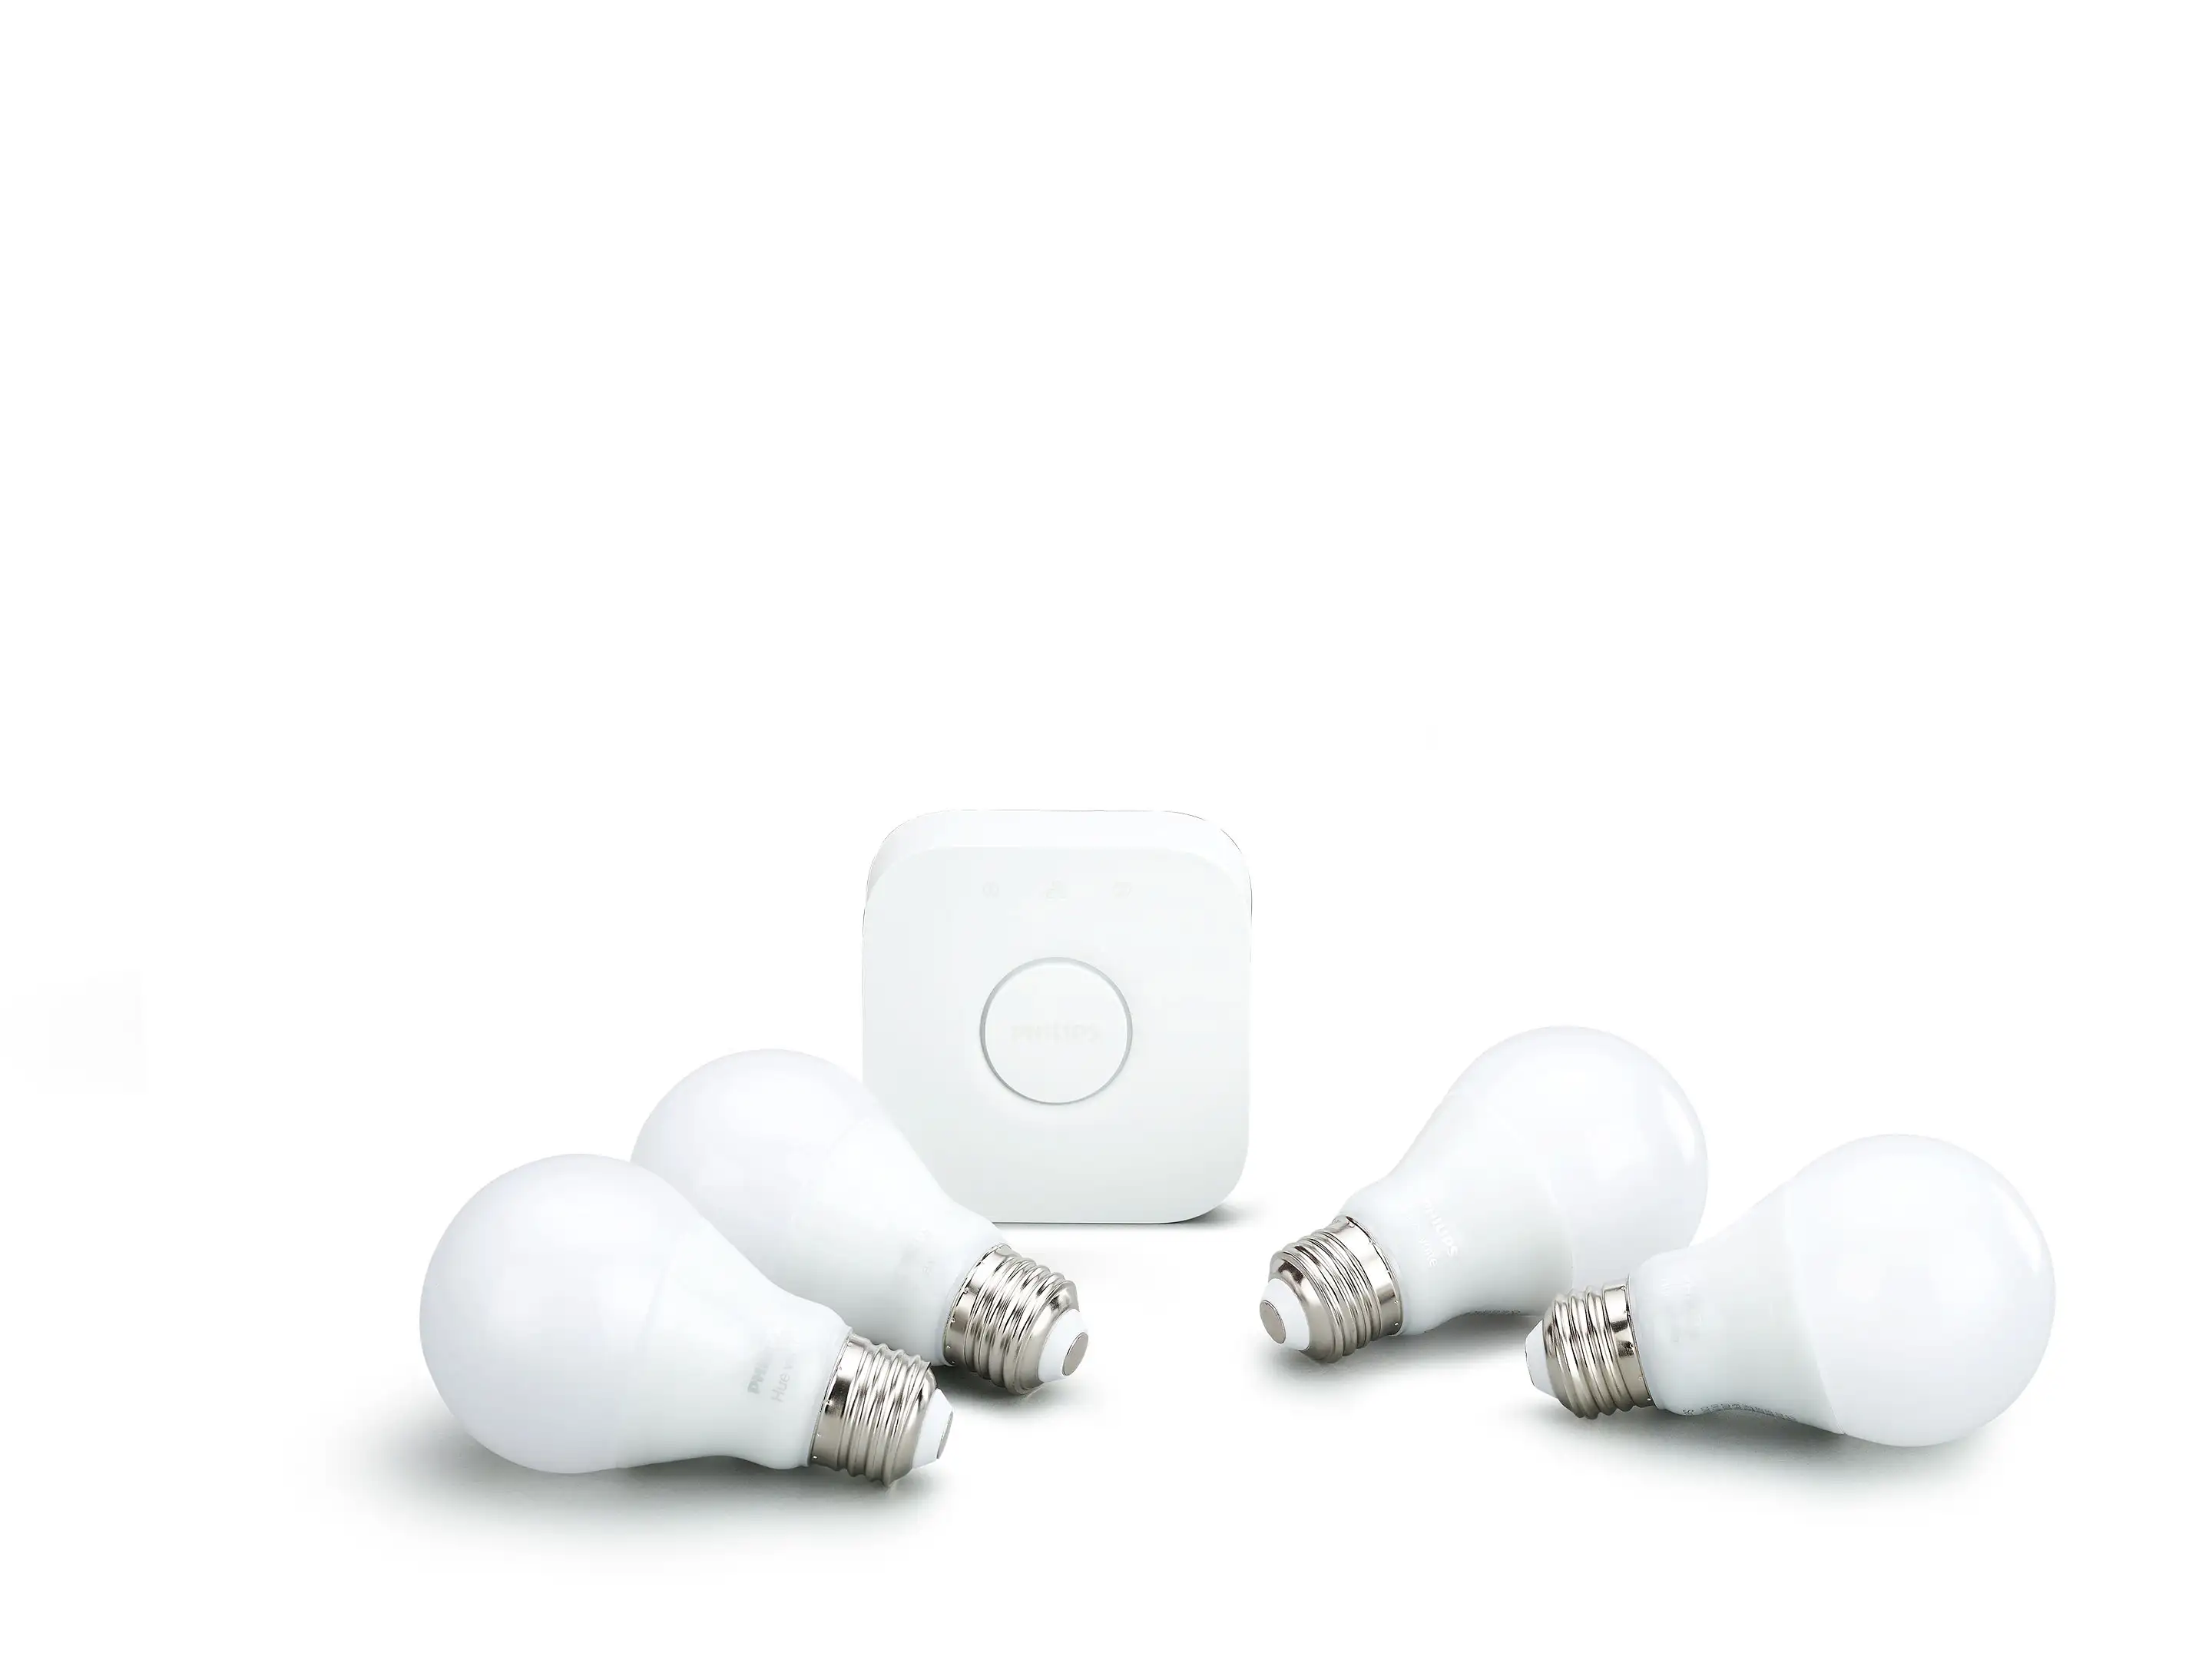 Cast your home in a new light
                            
                            $100-$600
                            
                            Move your home into the future by replacing your old incandescent light bulbs with Wi-Fi- or Bluetooth-enabled versions that save energy and make your light switch obsolete. Companies from GE to Ikea manufacture these so-called smart bulbs, which often, but not always, require connection to a central hub. A starter kit of four light bulbs plus hub device from Philips Hue, one of the systems favored by gadget site Tom’s Guide, is $100. Packs of four additional bulbs cost $50. Considering that the average home has close to 40 light bulbs, you can outfit your entire home with smart bulbs for $550. Assuming you haven’t already upgraded to LED or CFL bulbs, you will also cut the cost of lighting your home by half or more.